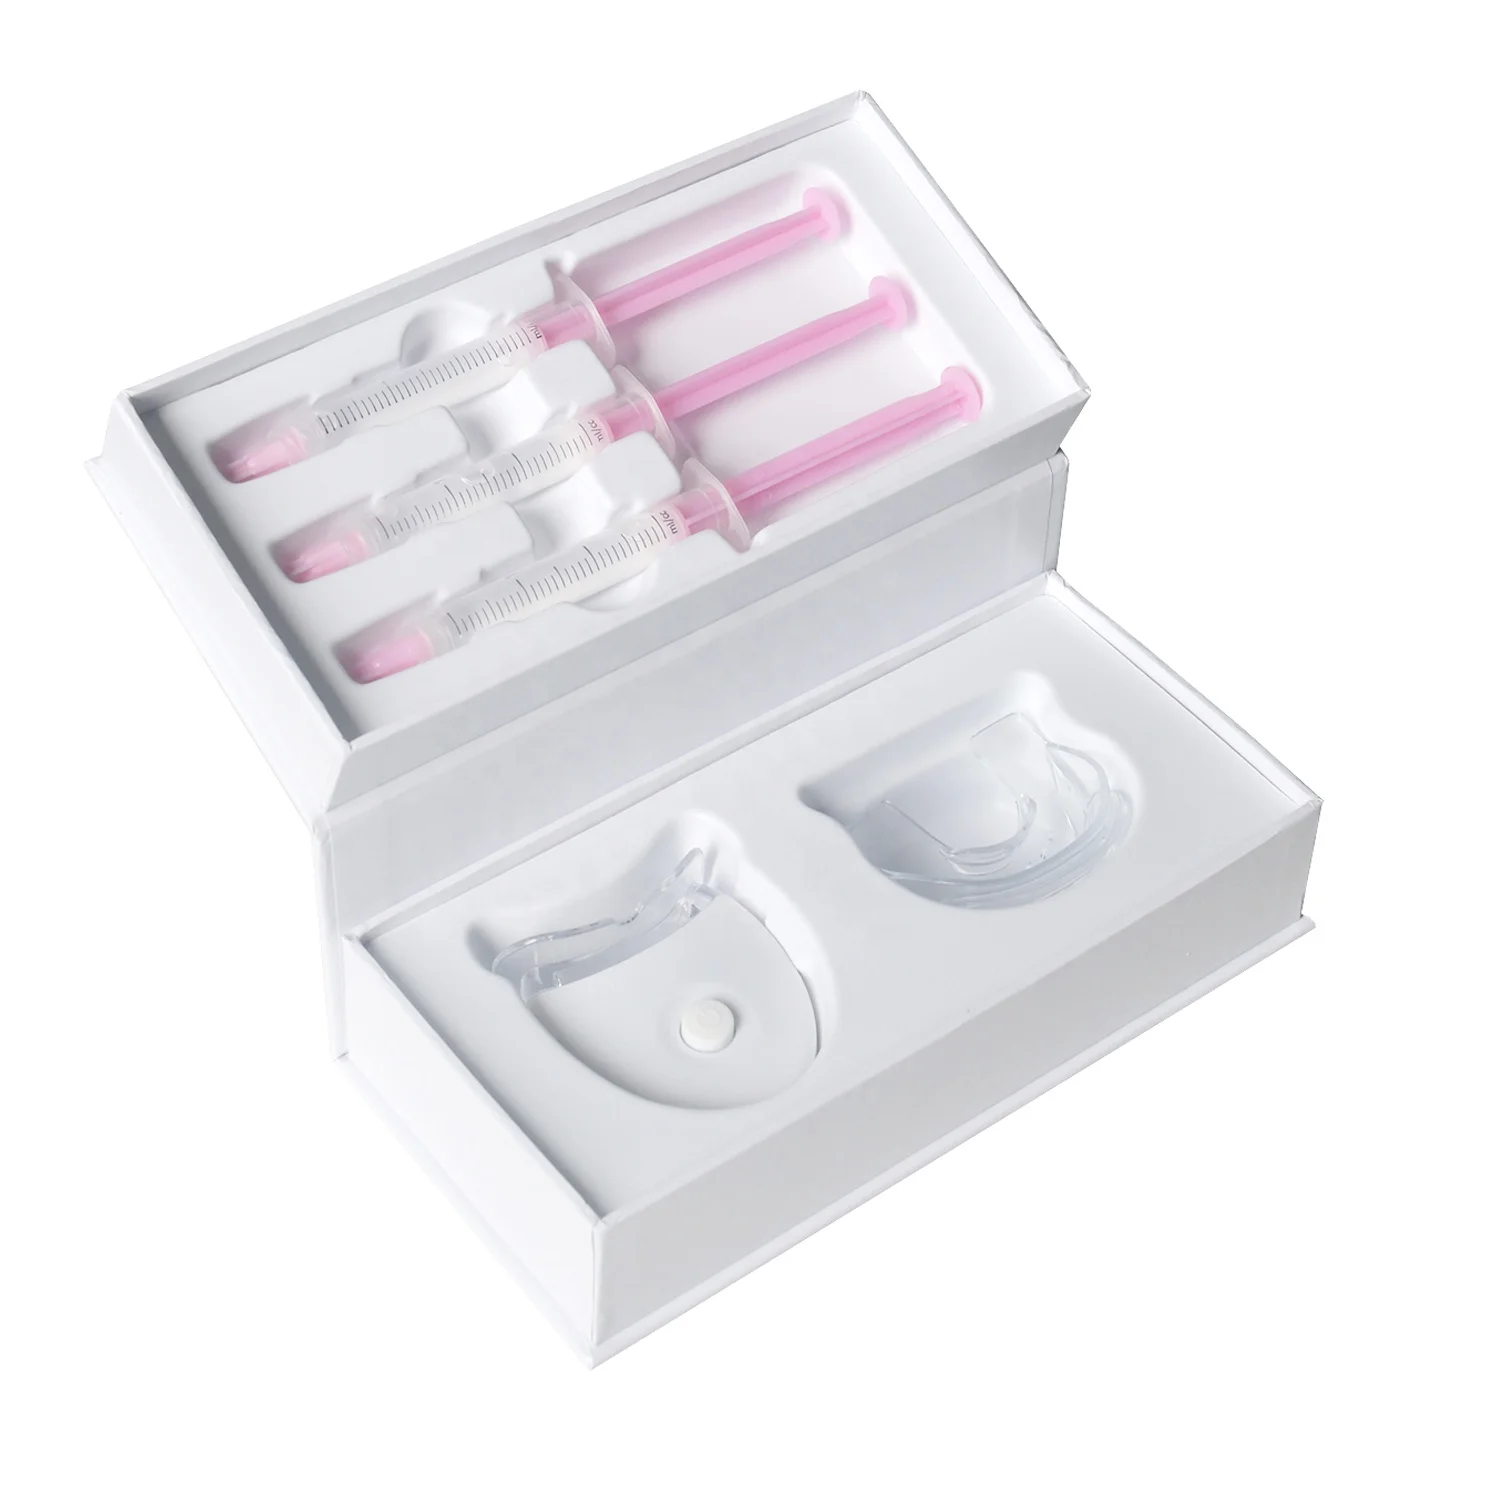 the best teeth whitening kits and bleaching kit available